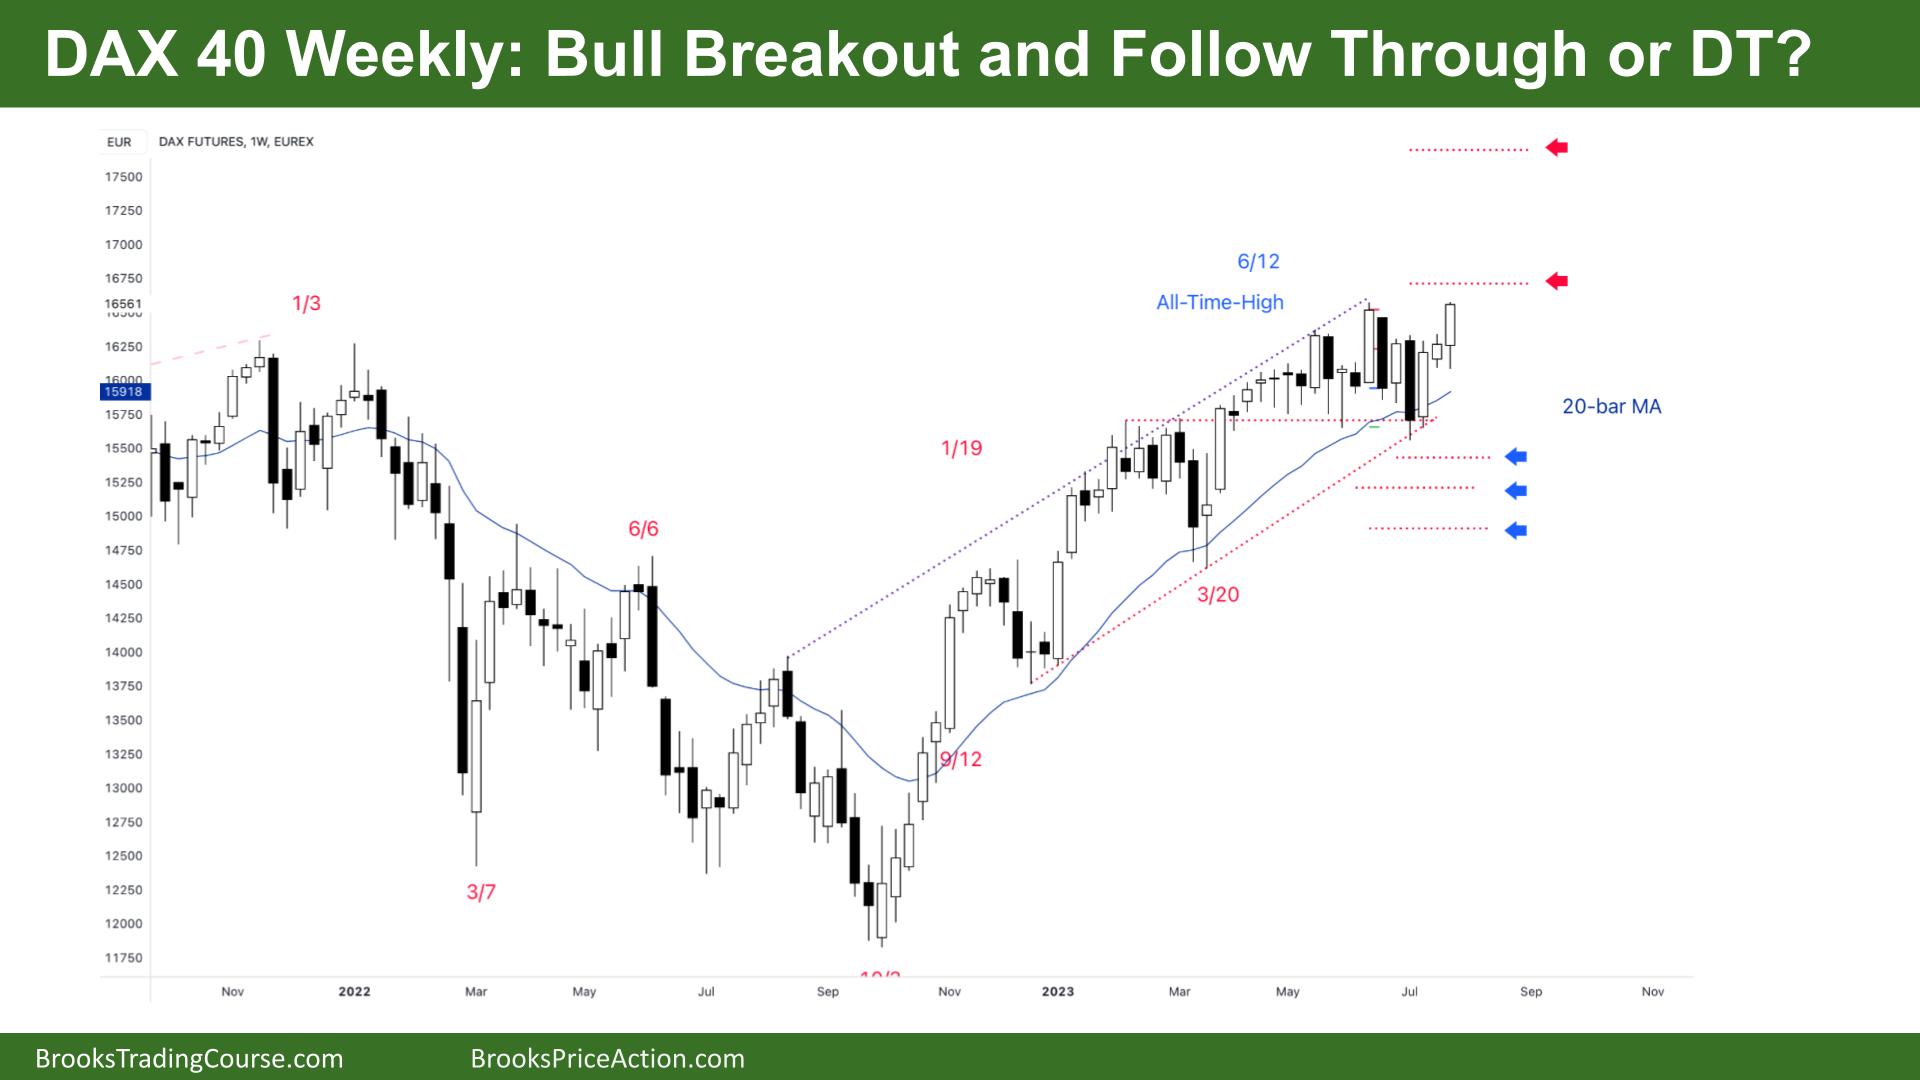 DAX 40 Bull Breakout and Follow Through or DT